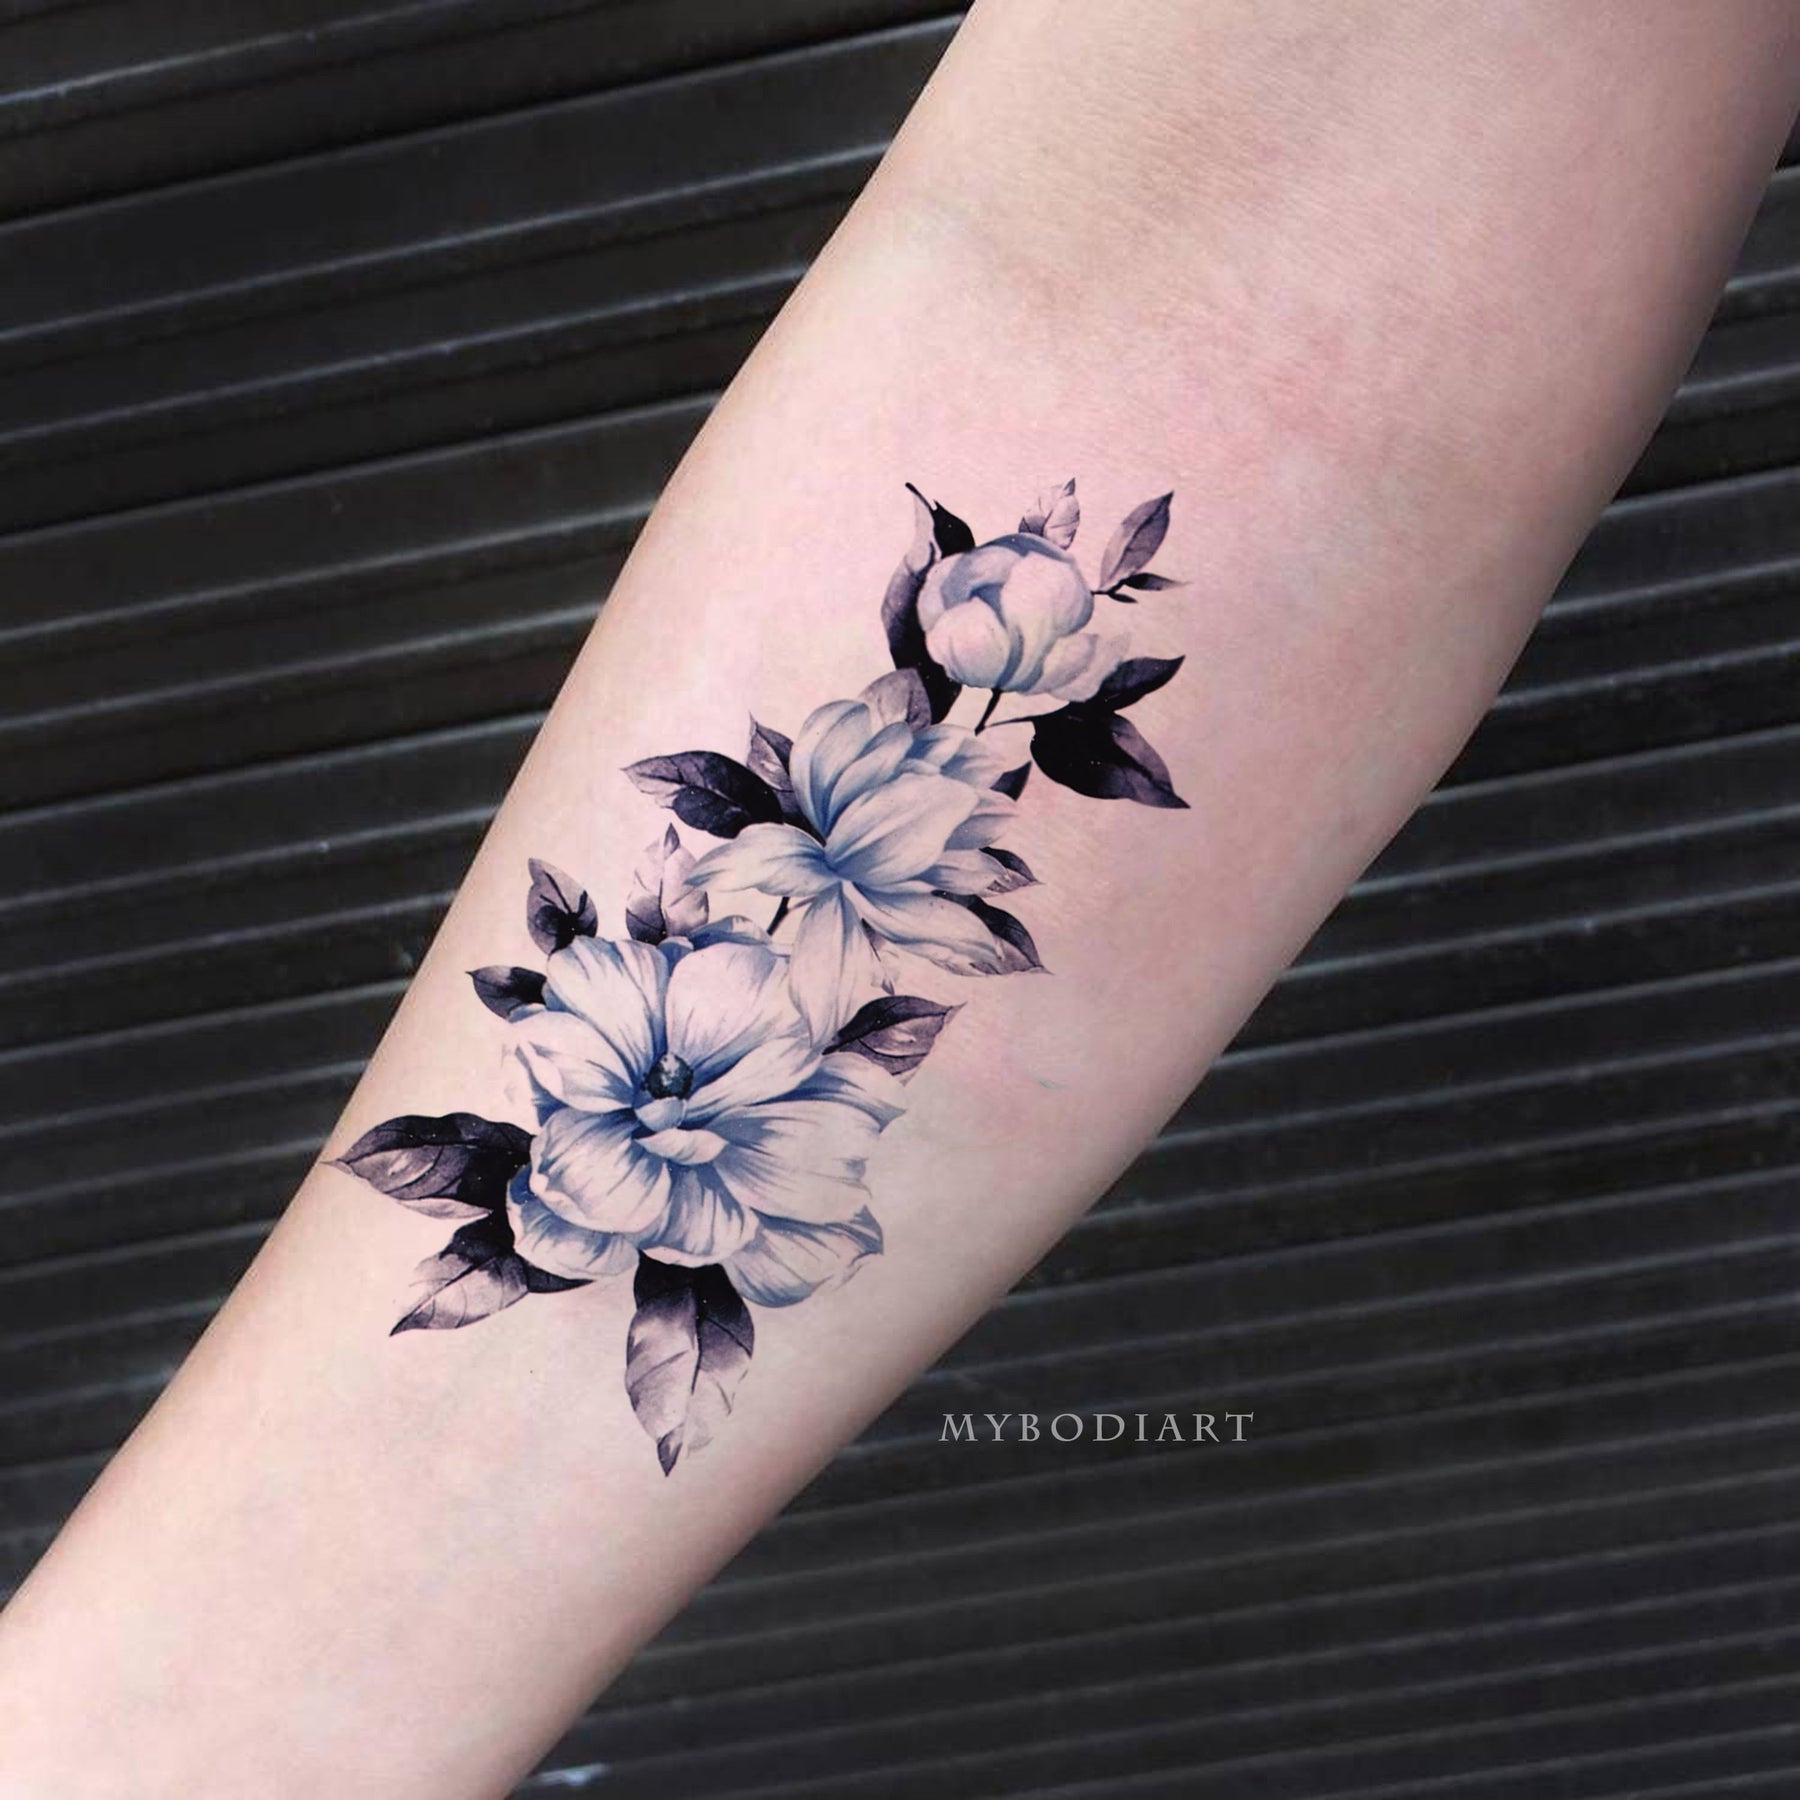 Temporary Tattoos Inspired by Nature – MyBodiArt